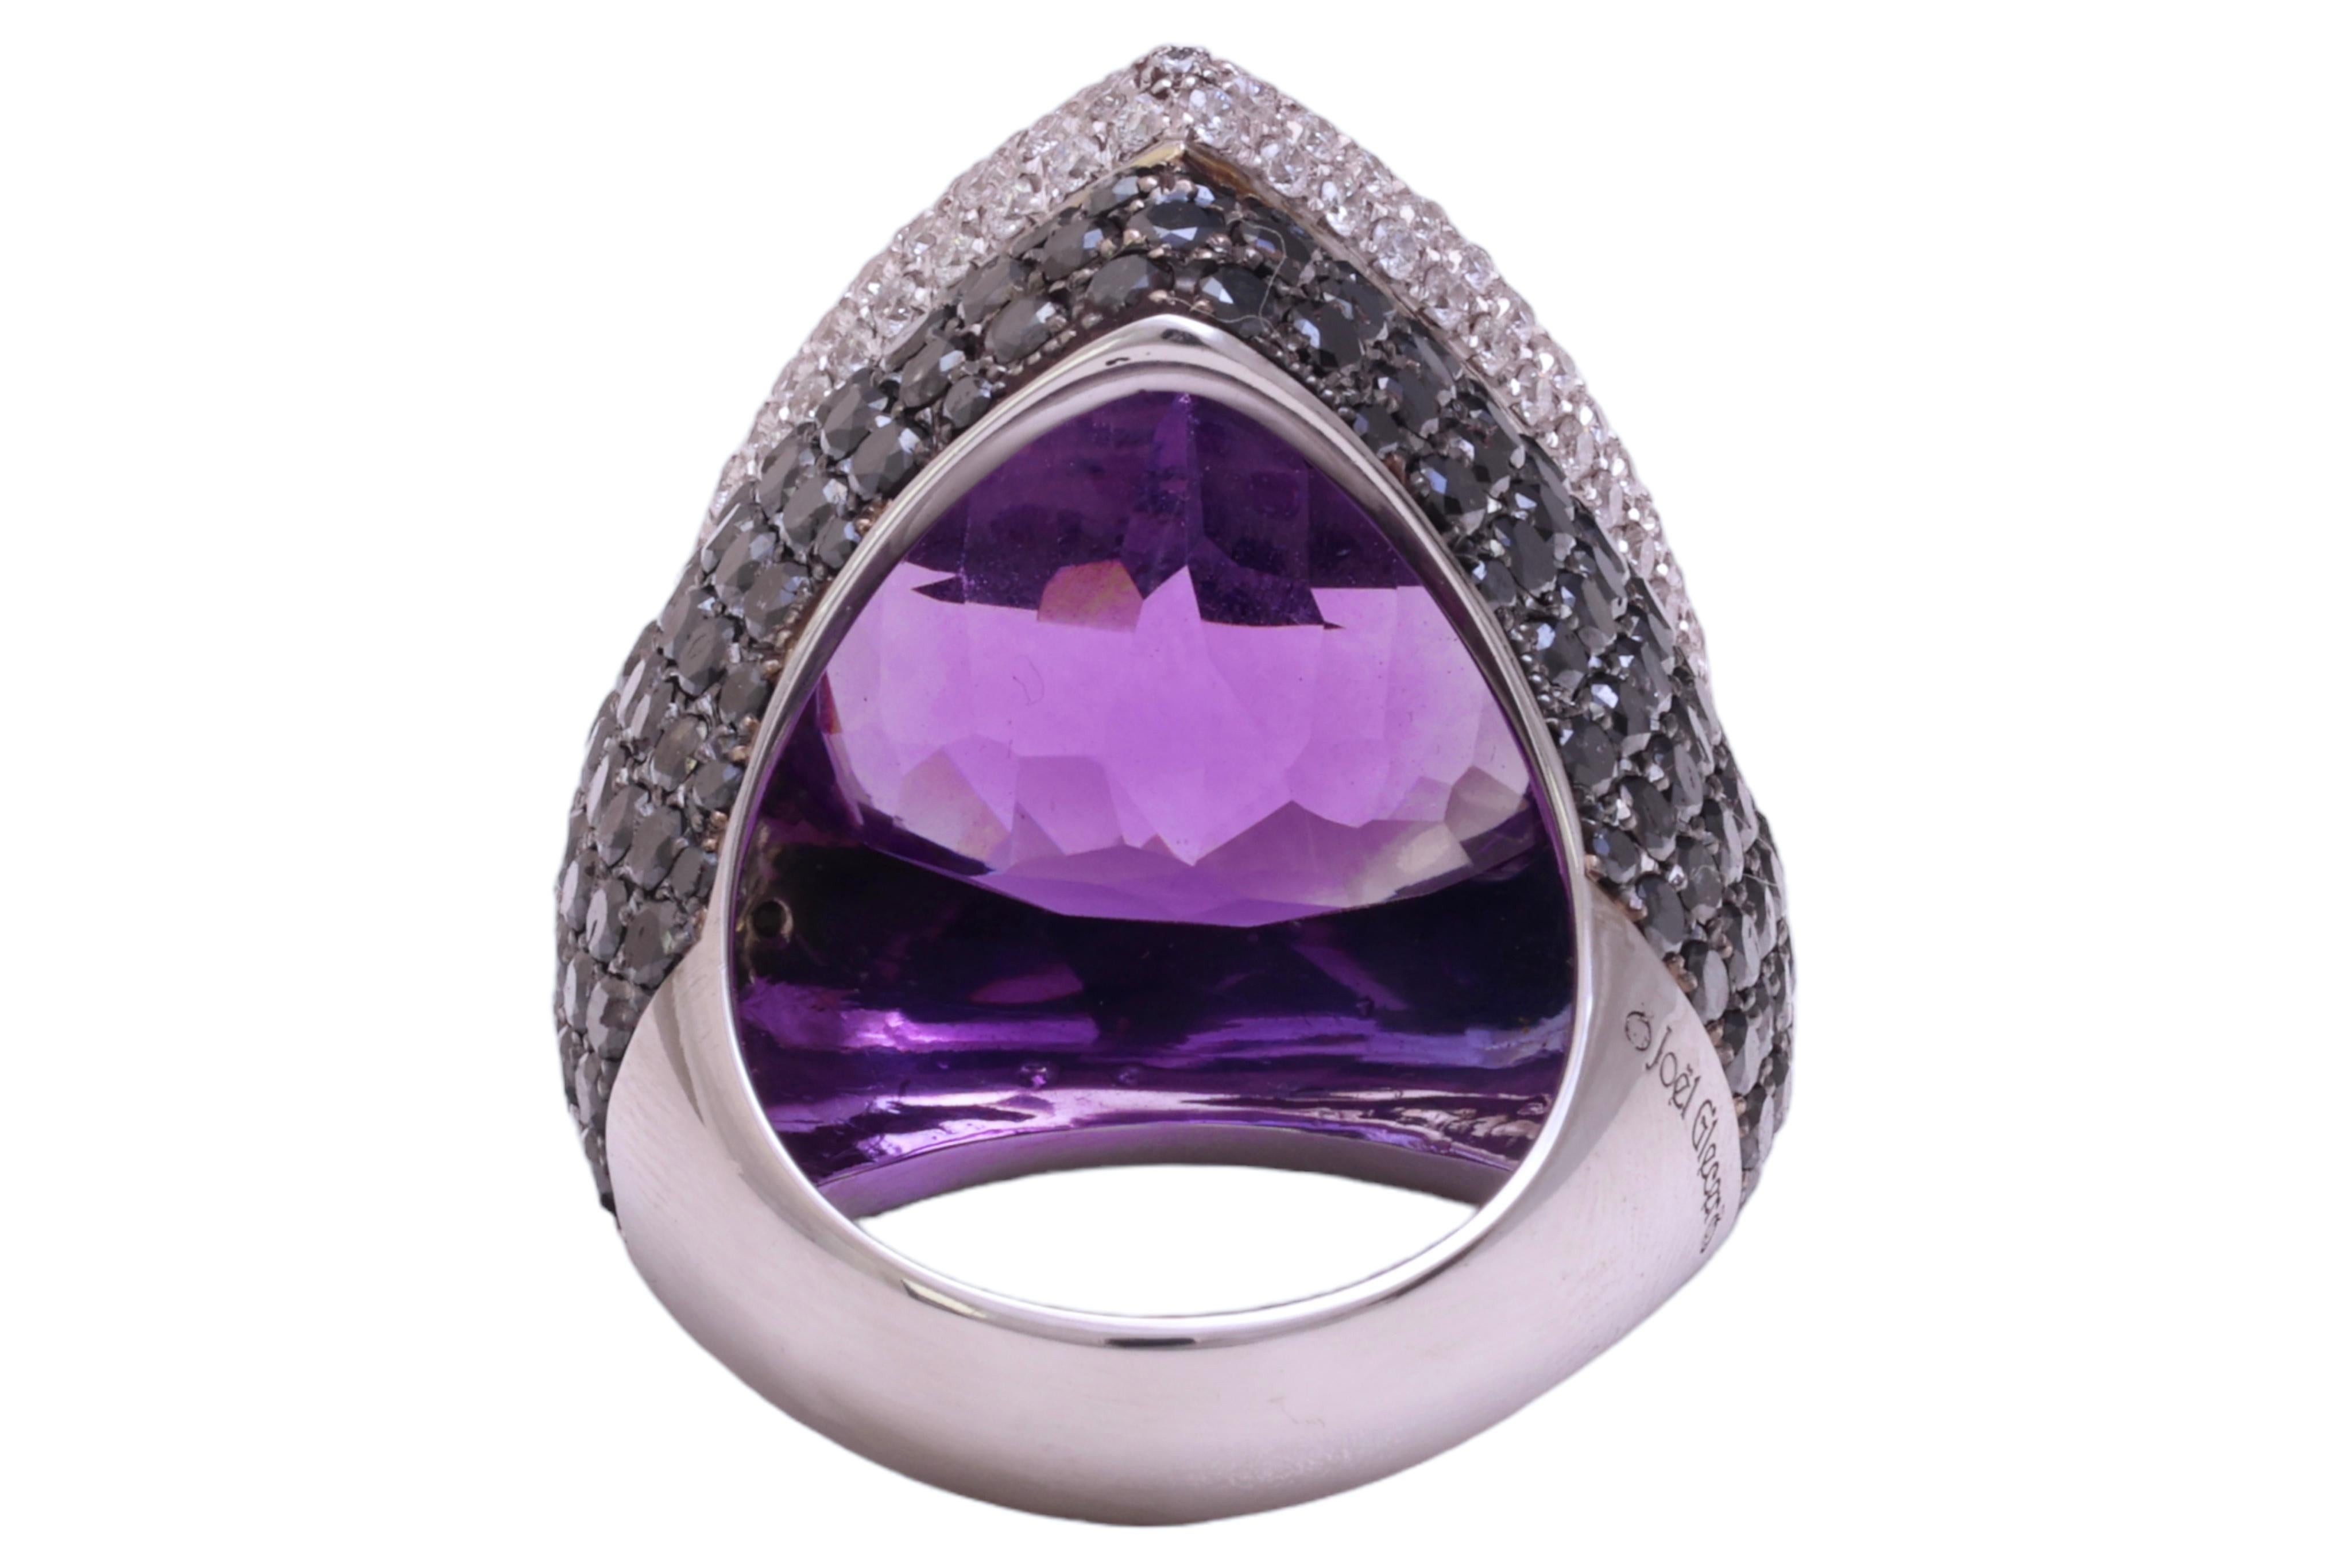 18 kt. White Gold Ring With 27.25 ct. Amethyst, 11.33ct Black & White Diamonds  For Sale 1